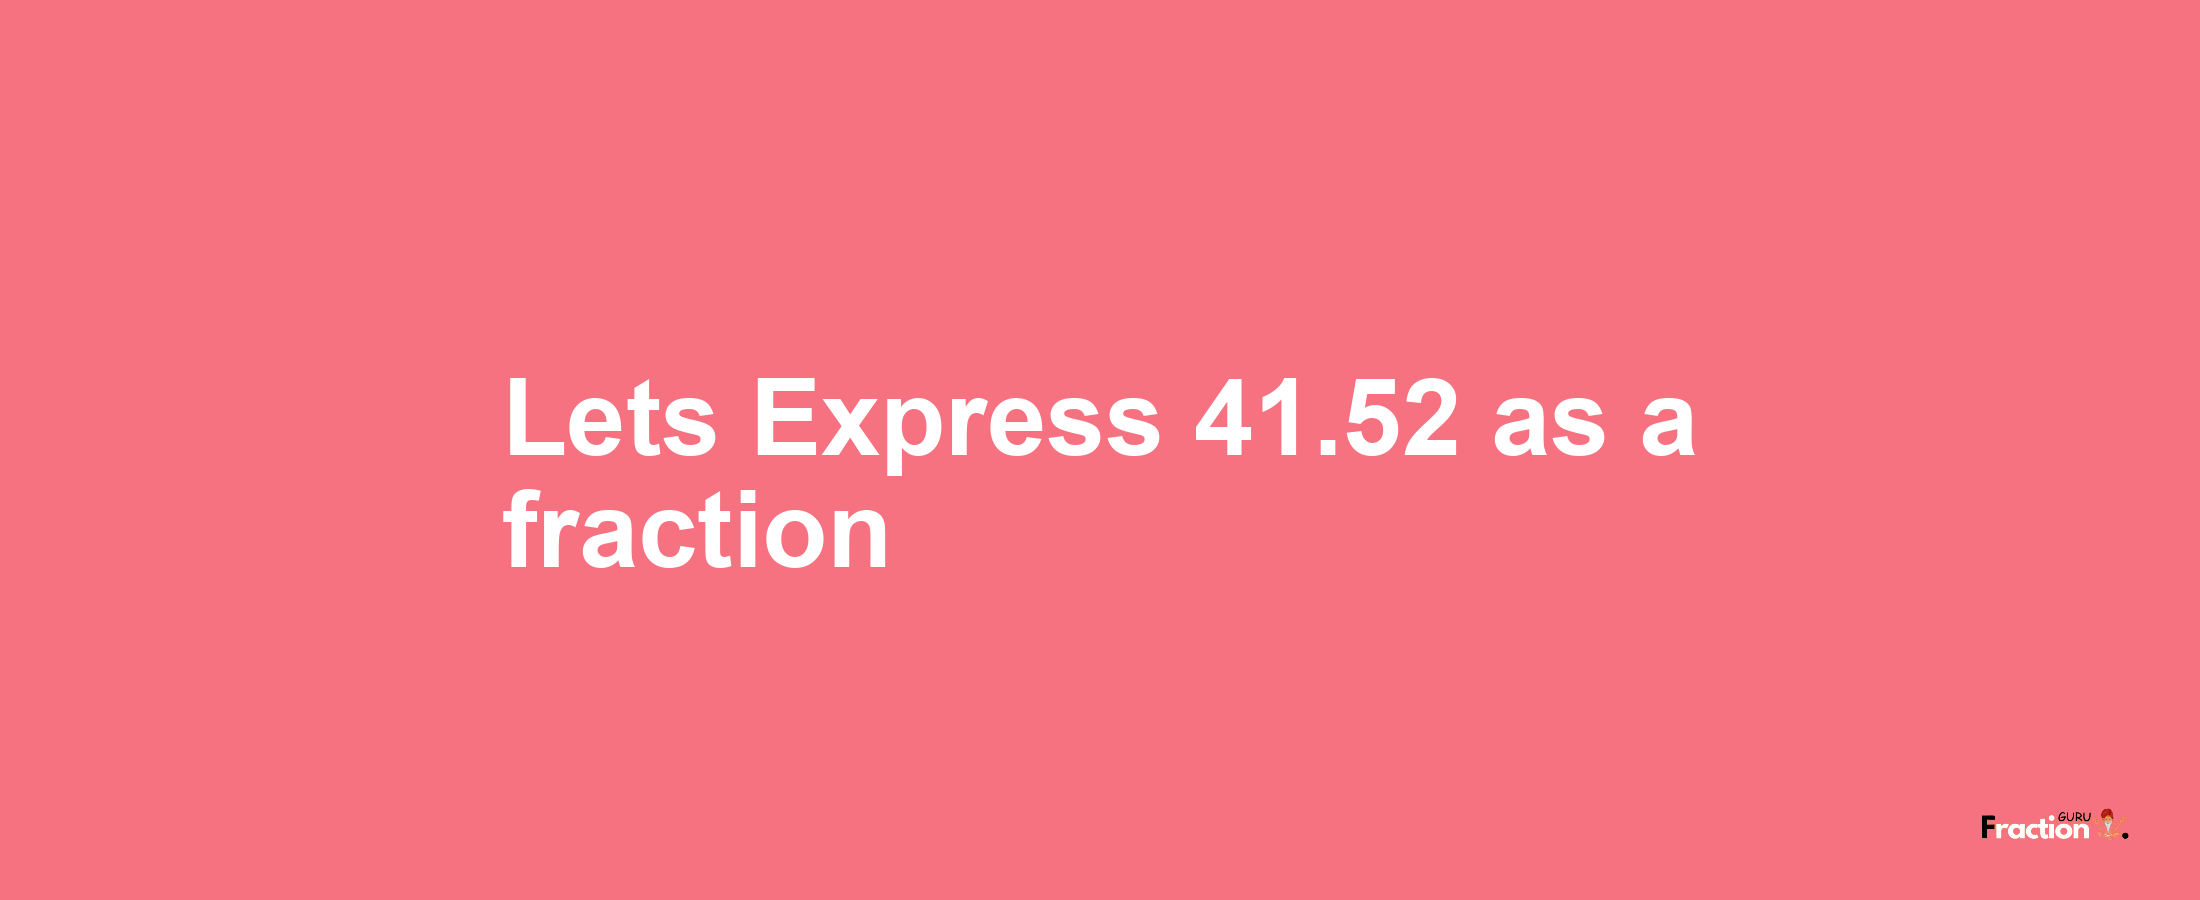 Lets Express 41.52 as afraction